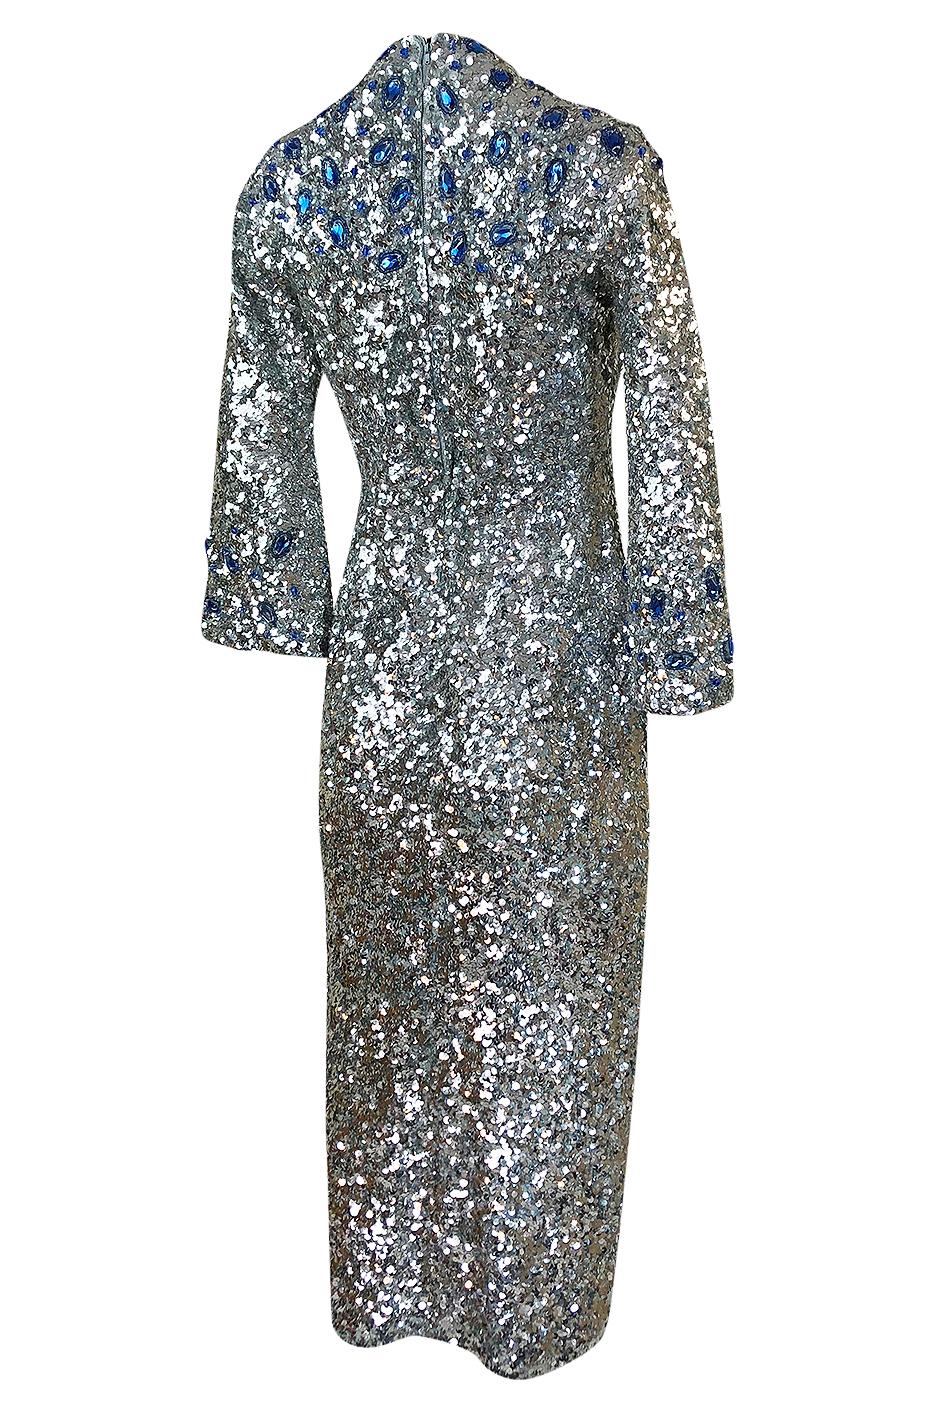 In its heyday the Gene Shelly of California label was highly sought after. The label was doing some of the best of the early sequinned vintage pieces that you could find anywhere on the planet. All of the sequin work that covers this dress was done